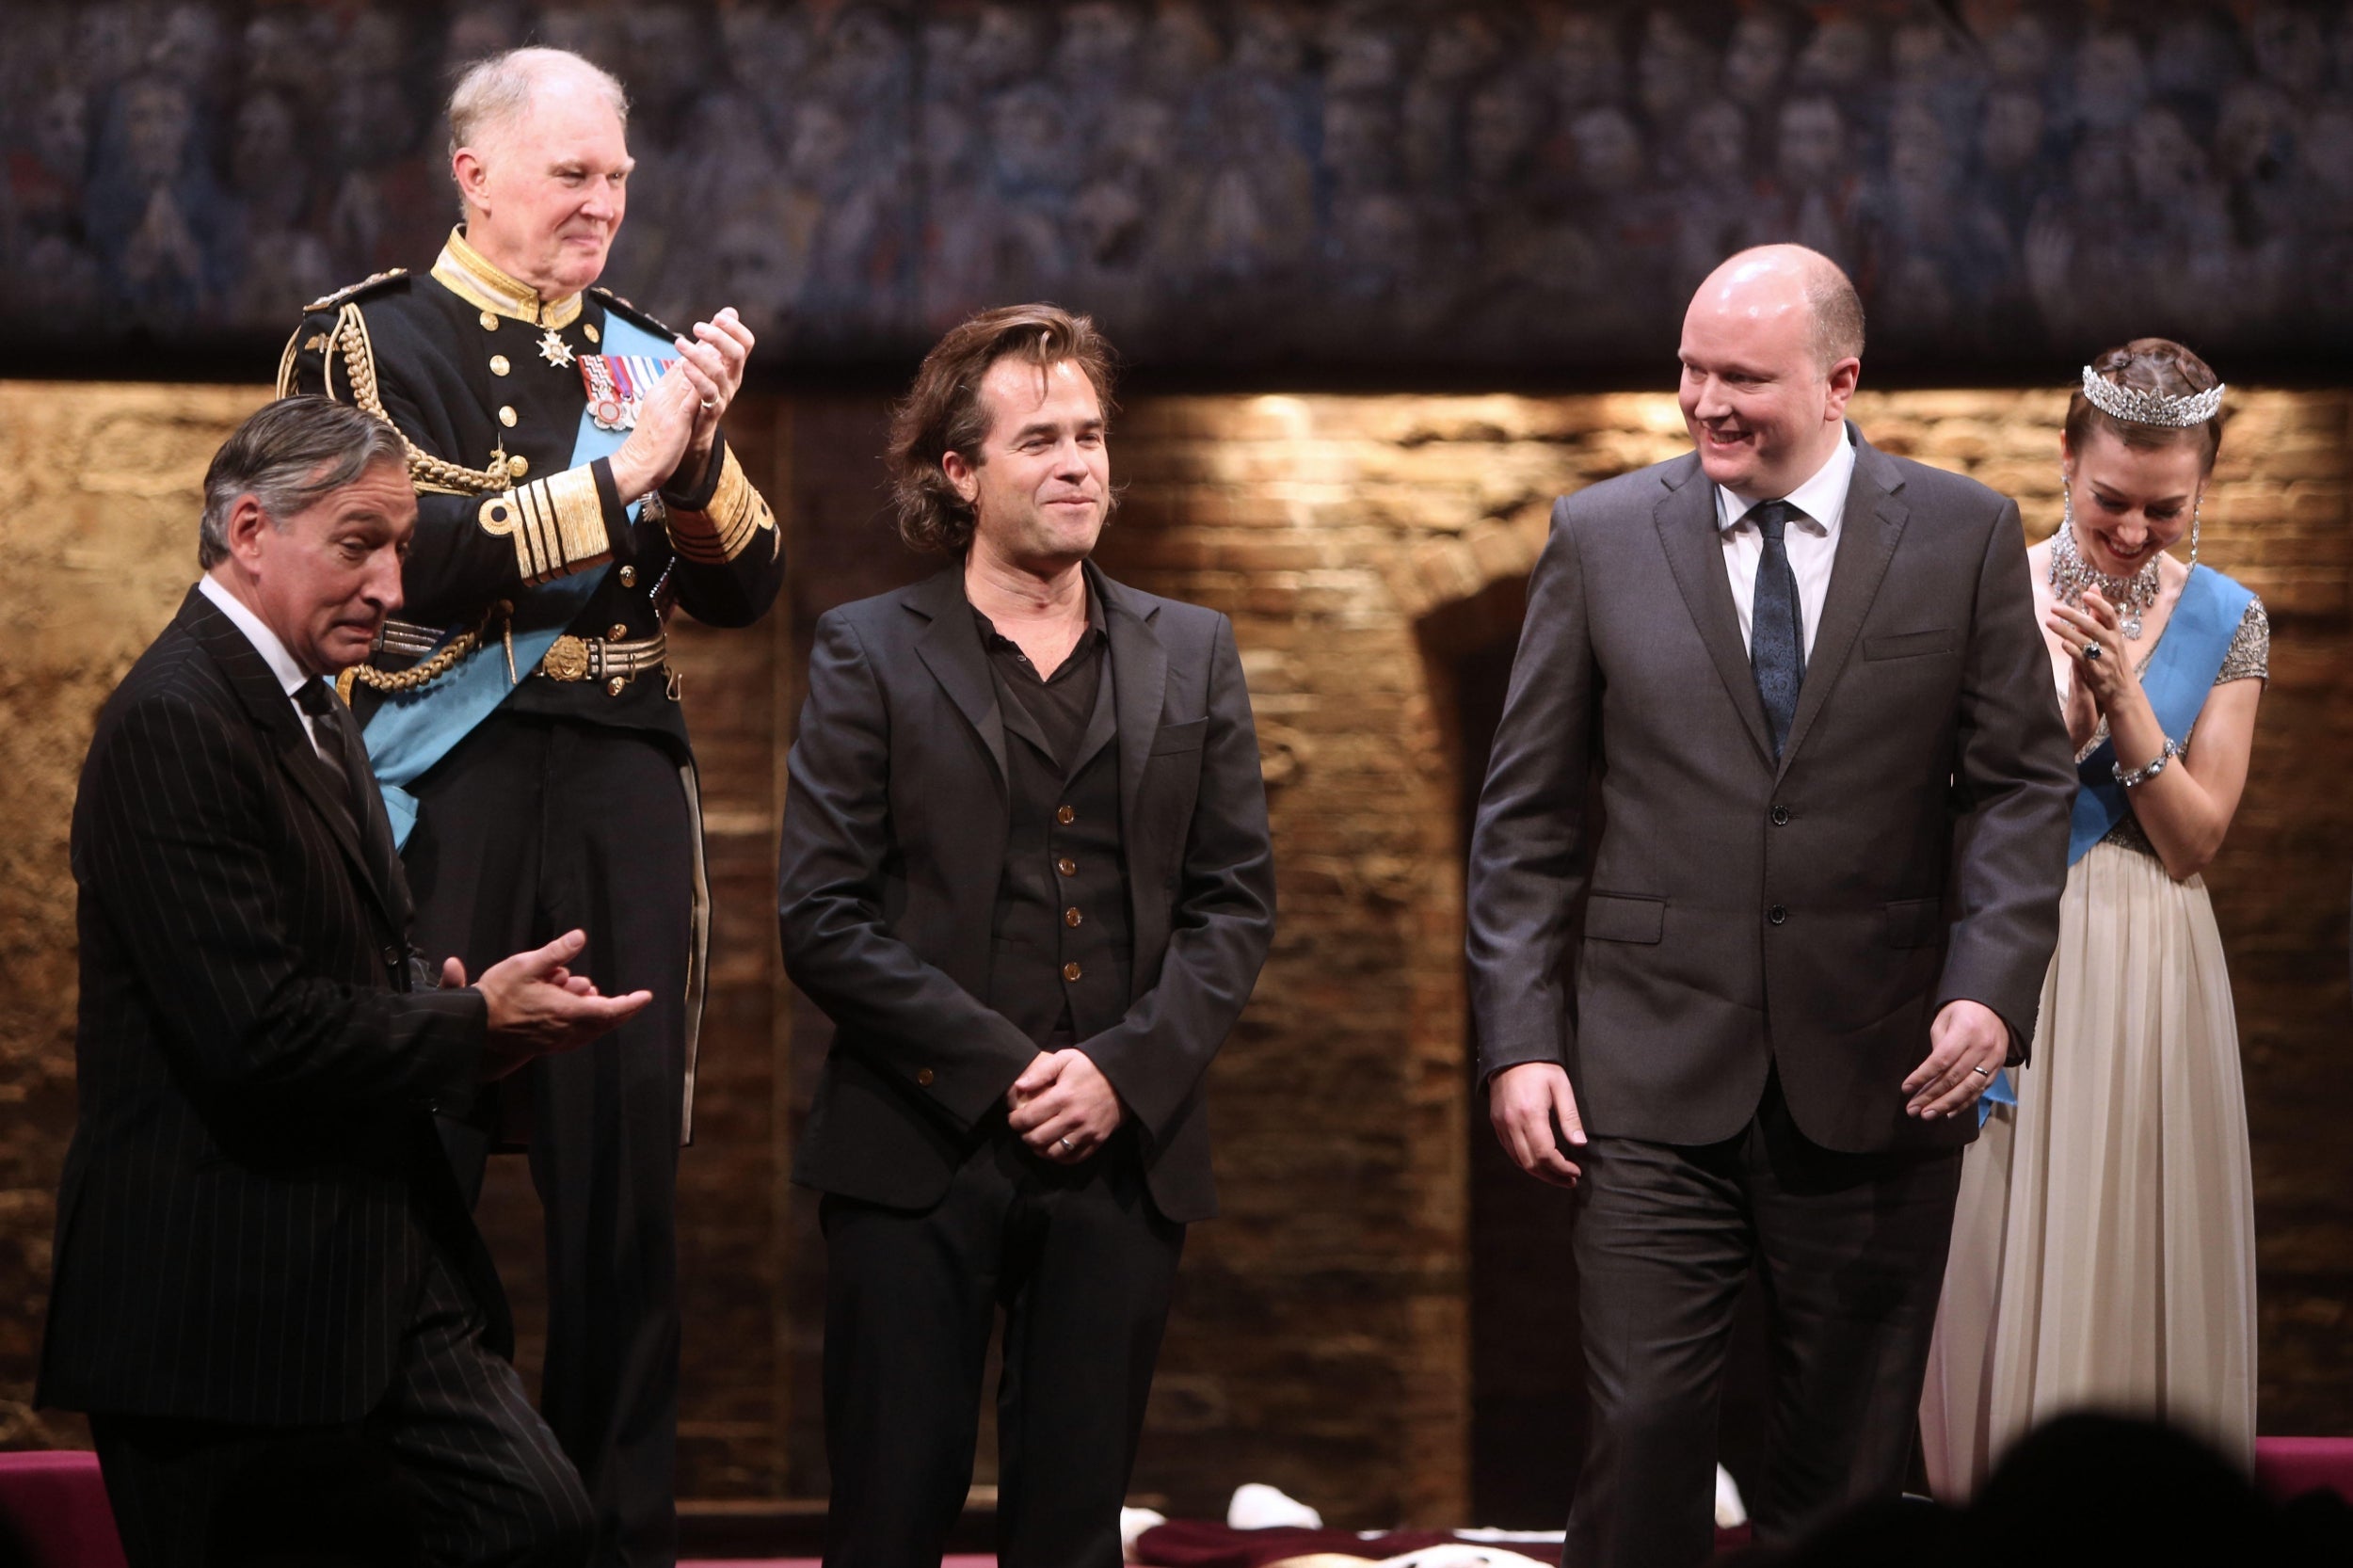 (L-R) Miles Richardson as James Reiss, Tim Pigott-Smith as Prince Charles, director Rupert Goold, playwright Bartlett and Lydia Wilson as Kate Middleton take a bow during the curtain call for the Broadway opening night of ‘King Charles III’ at the Music Box Theatre in New York City in 2015